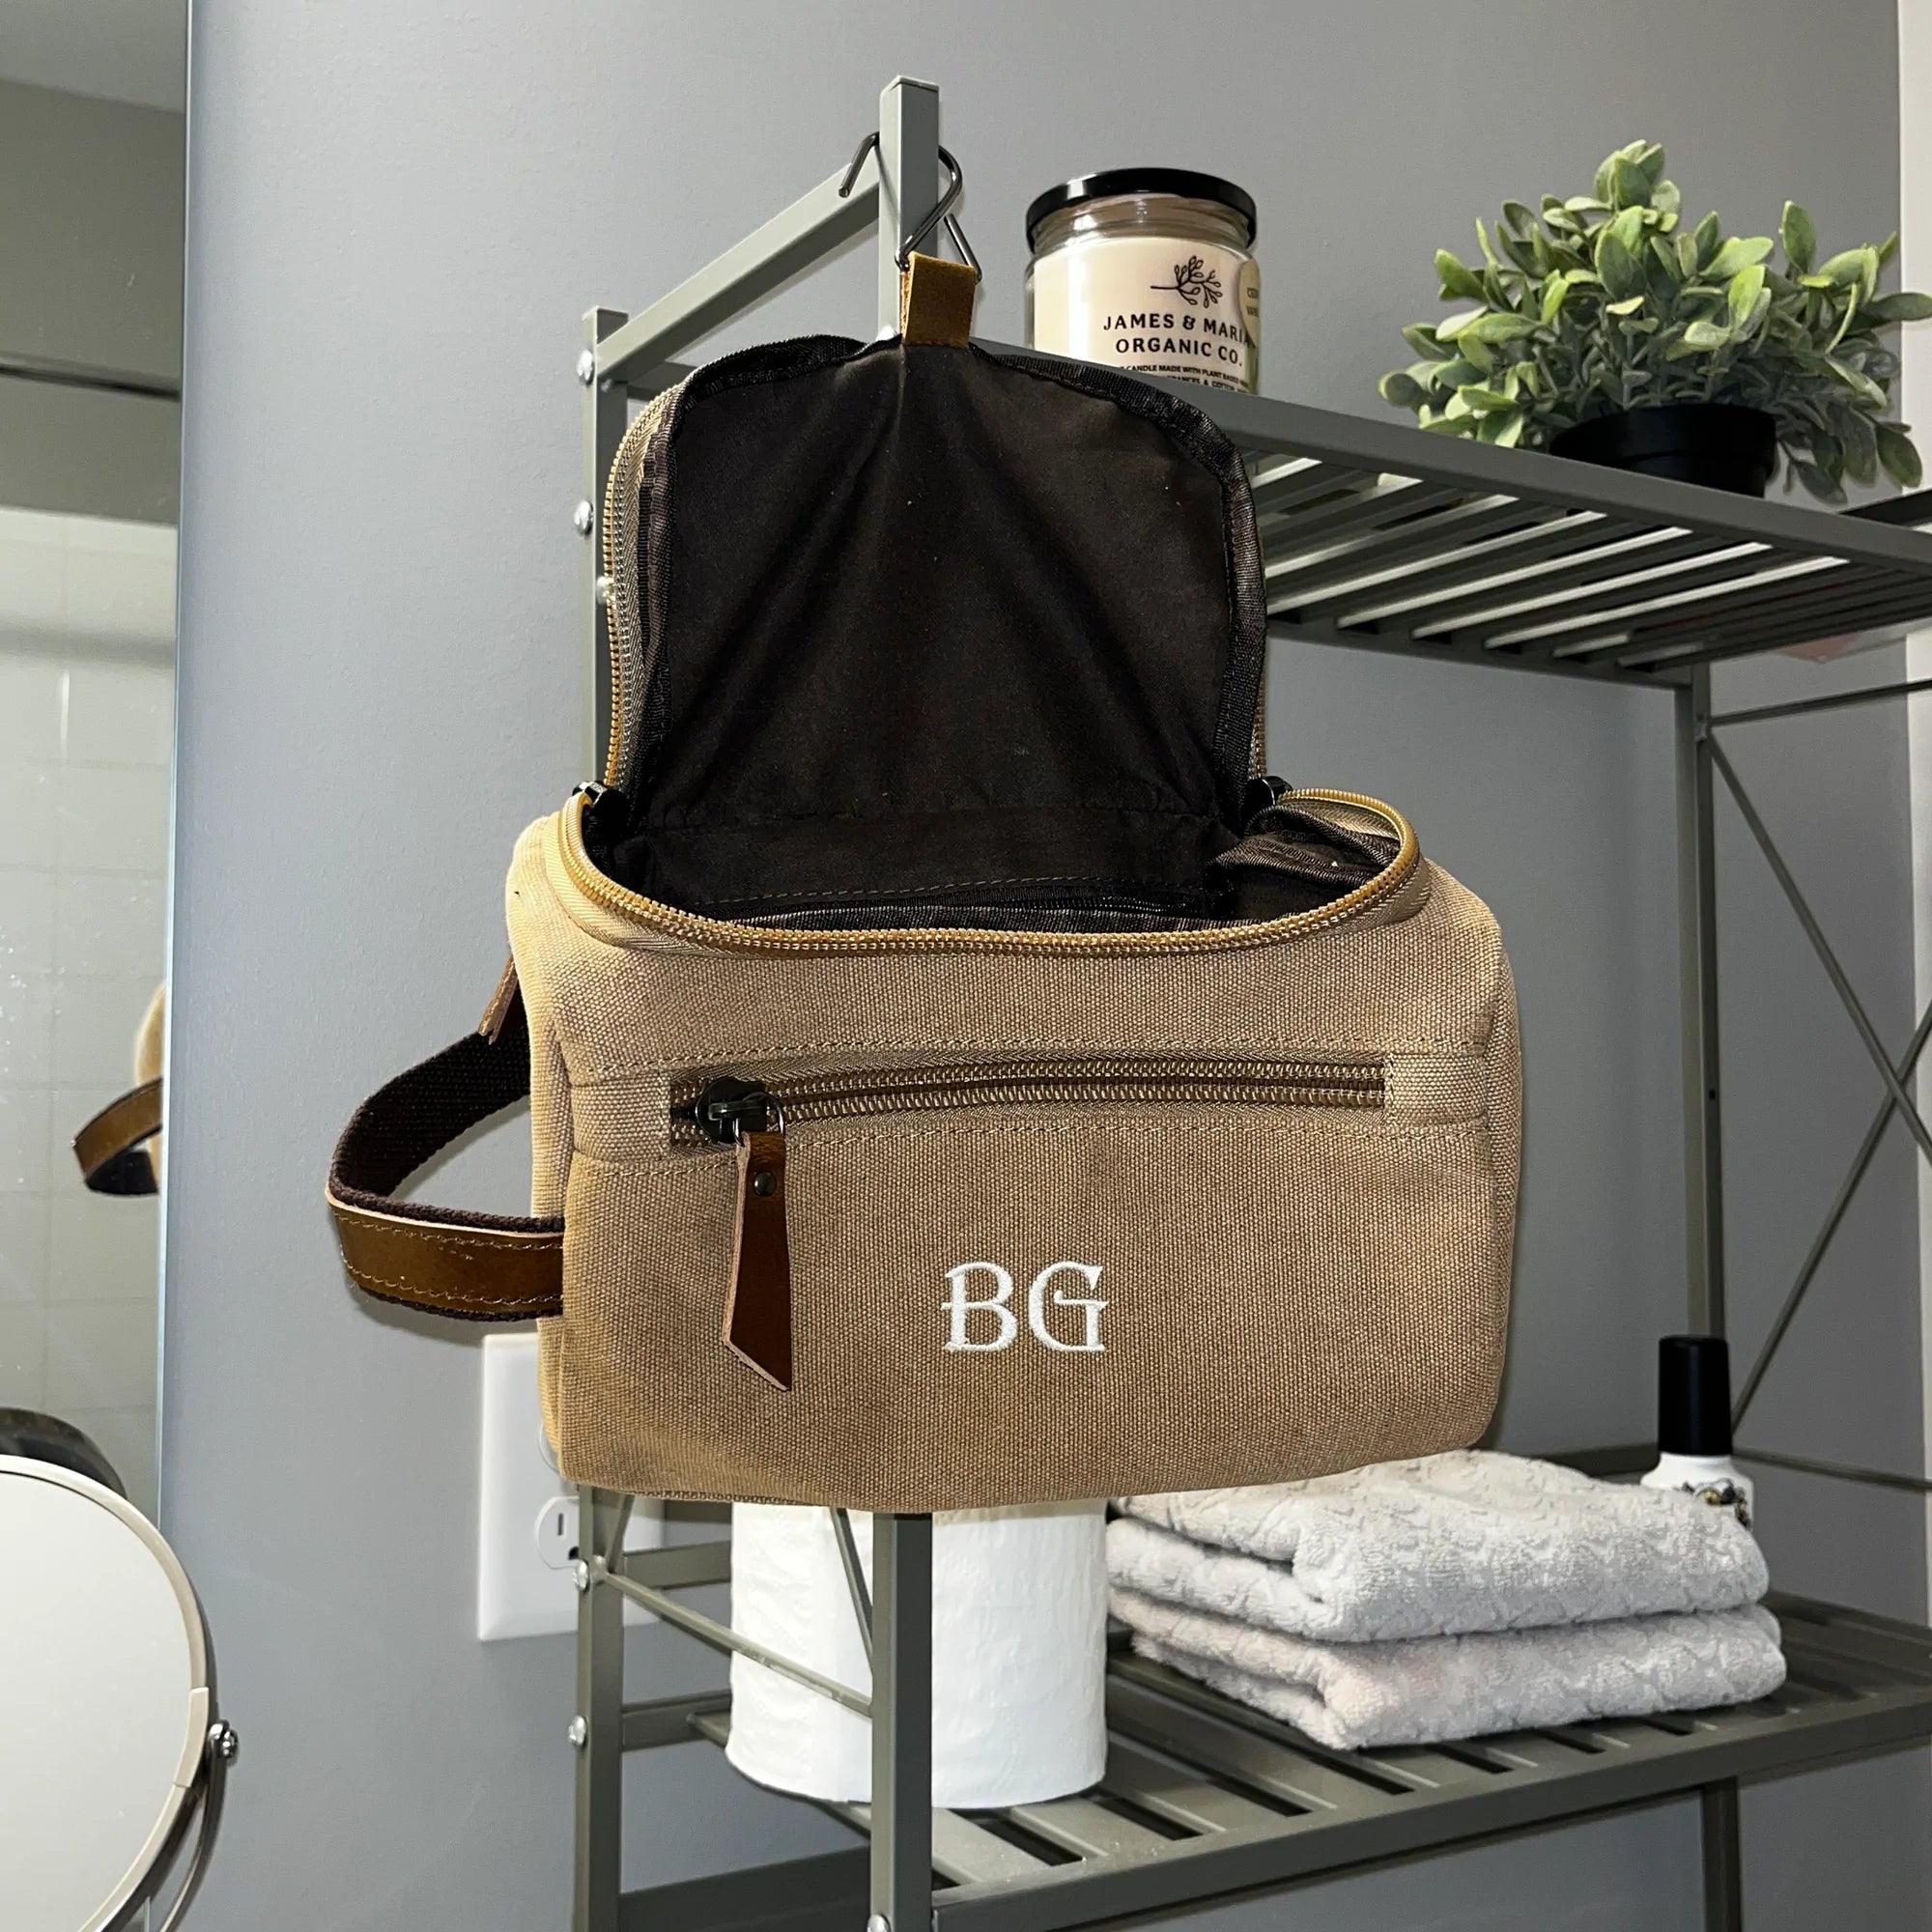 Monogrammed Overnight Bag and Toiletry Bag